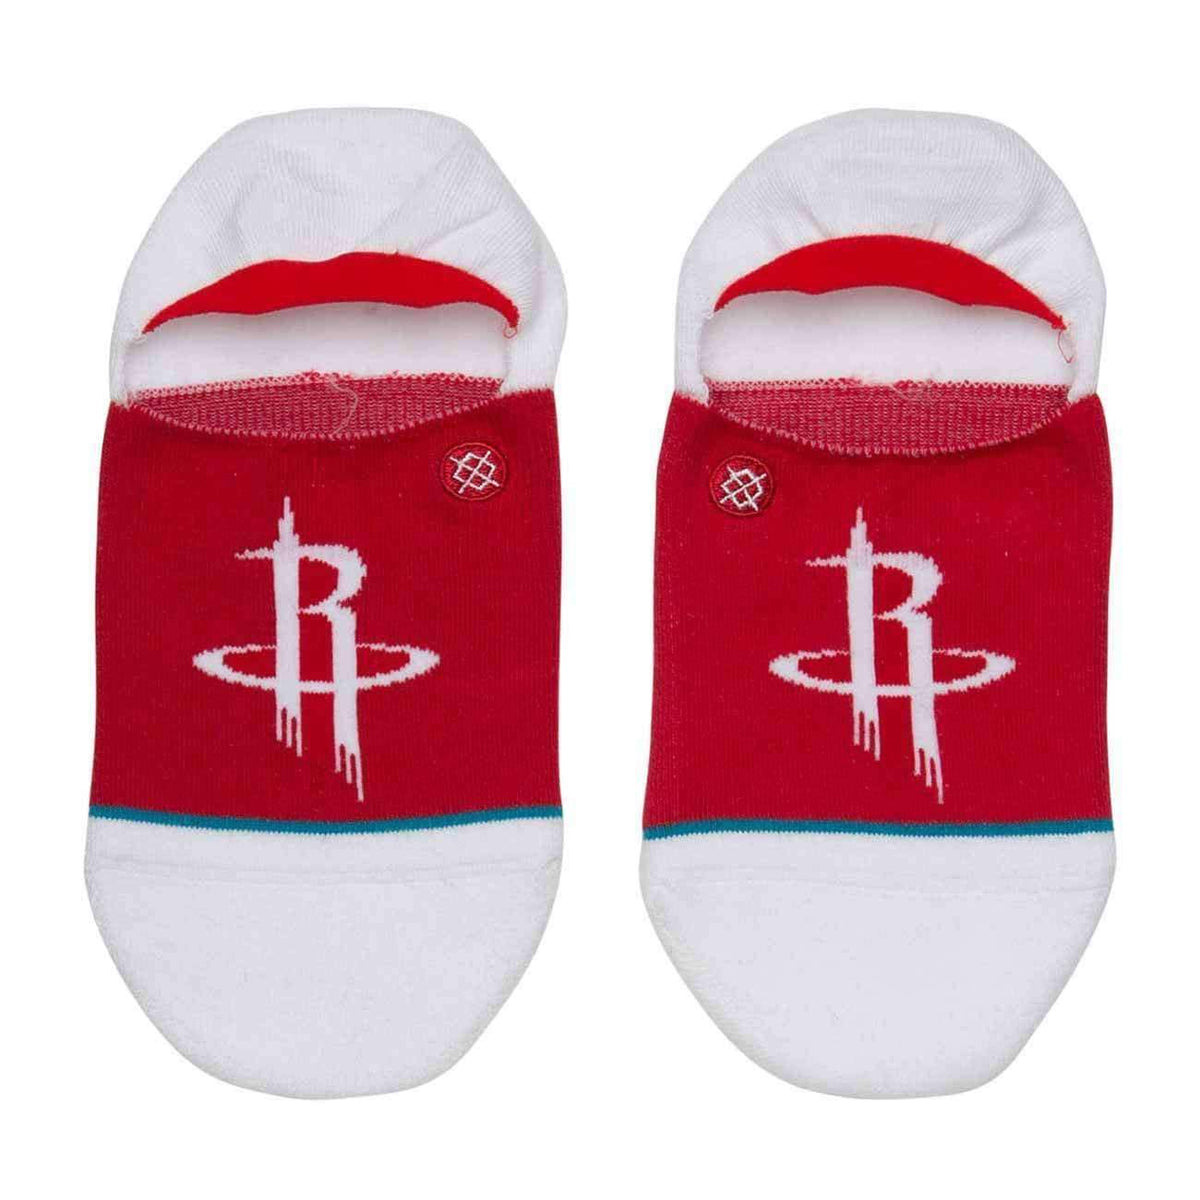 Stance NBA Arena Rockets Invisible Low Socks in Red Mens Low/Ankle Socks by Stance